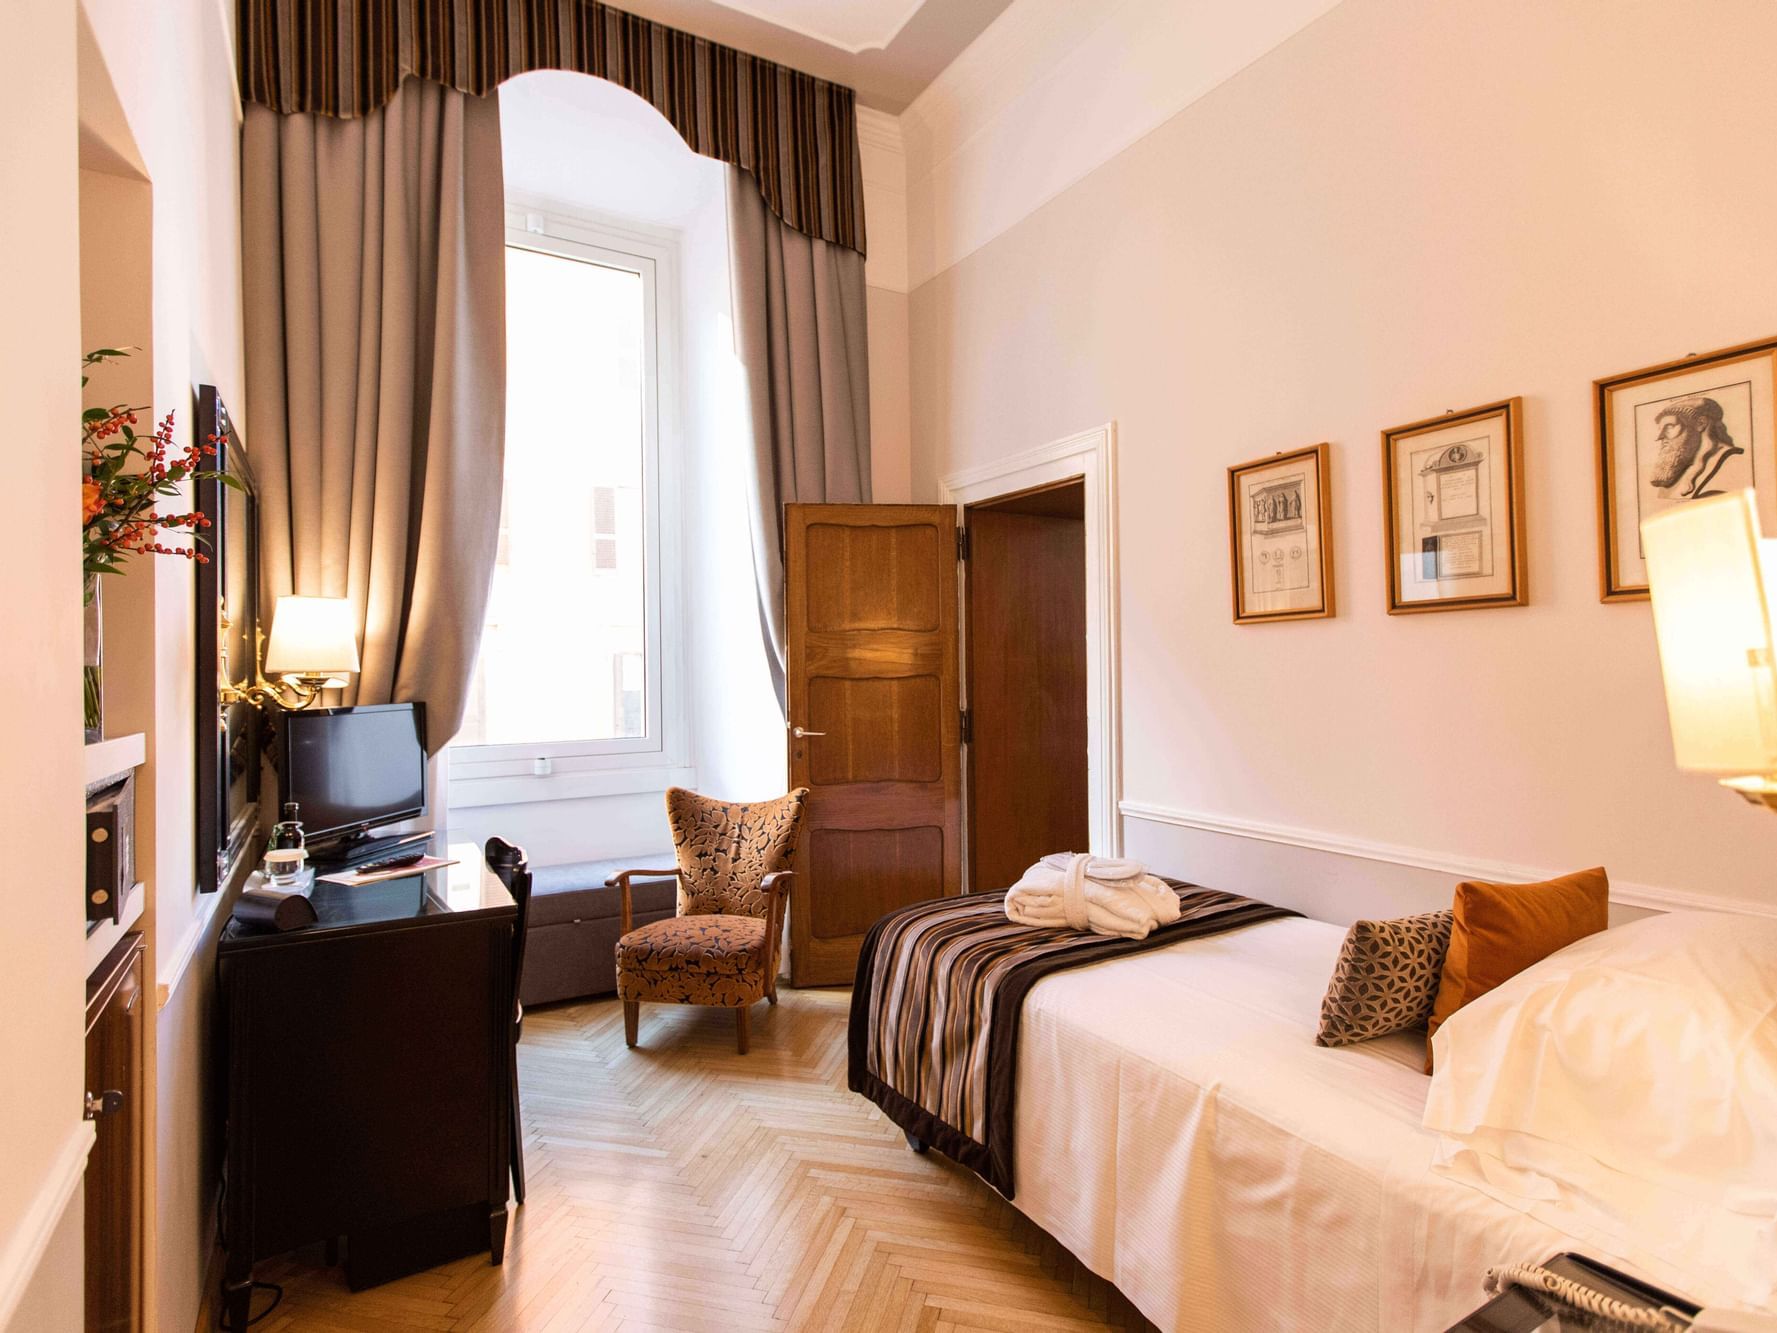 King bed, lounge & work desk in Single Room at Bettoja Hotel Massimo D'Azeglio